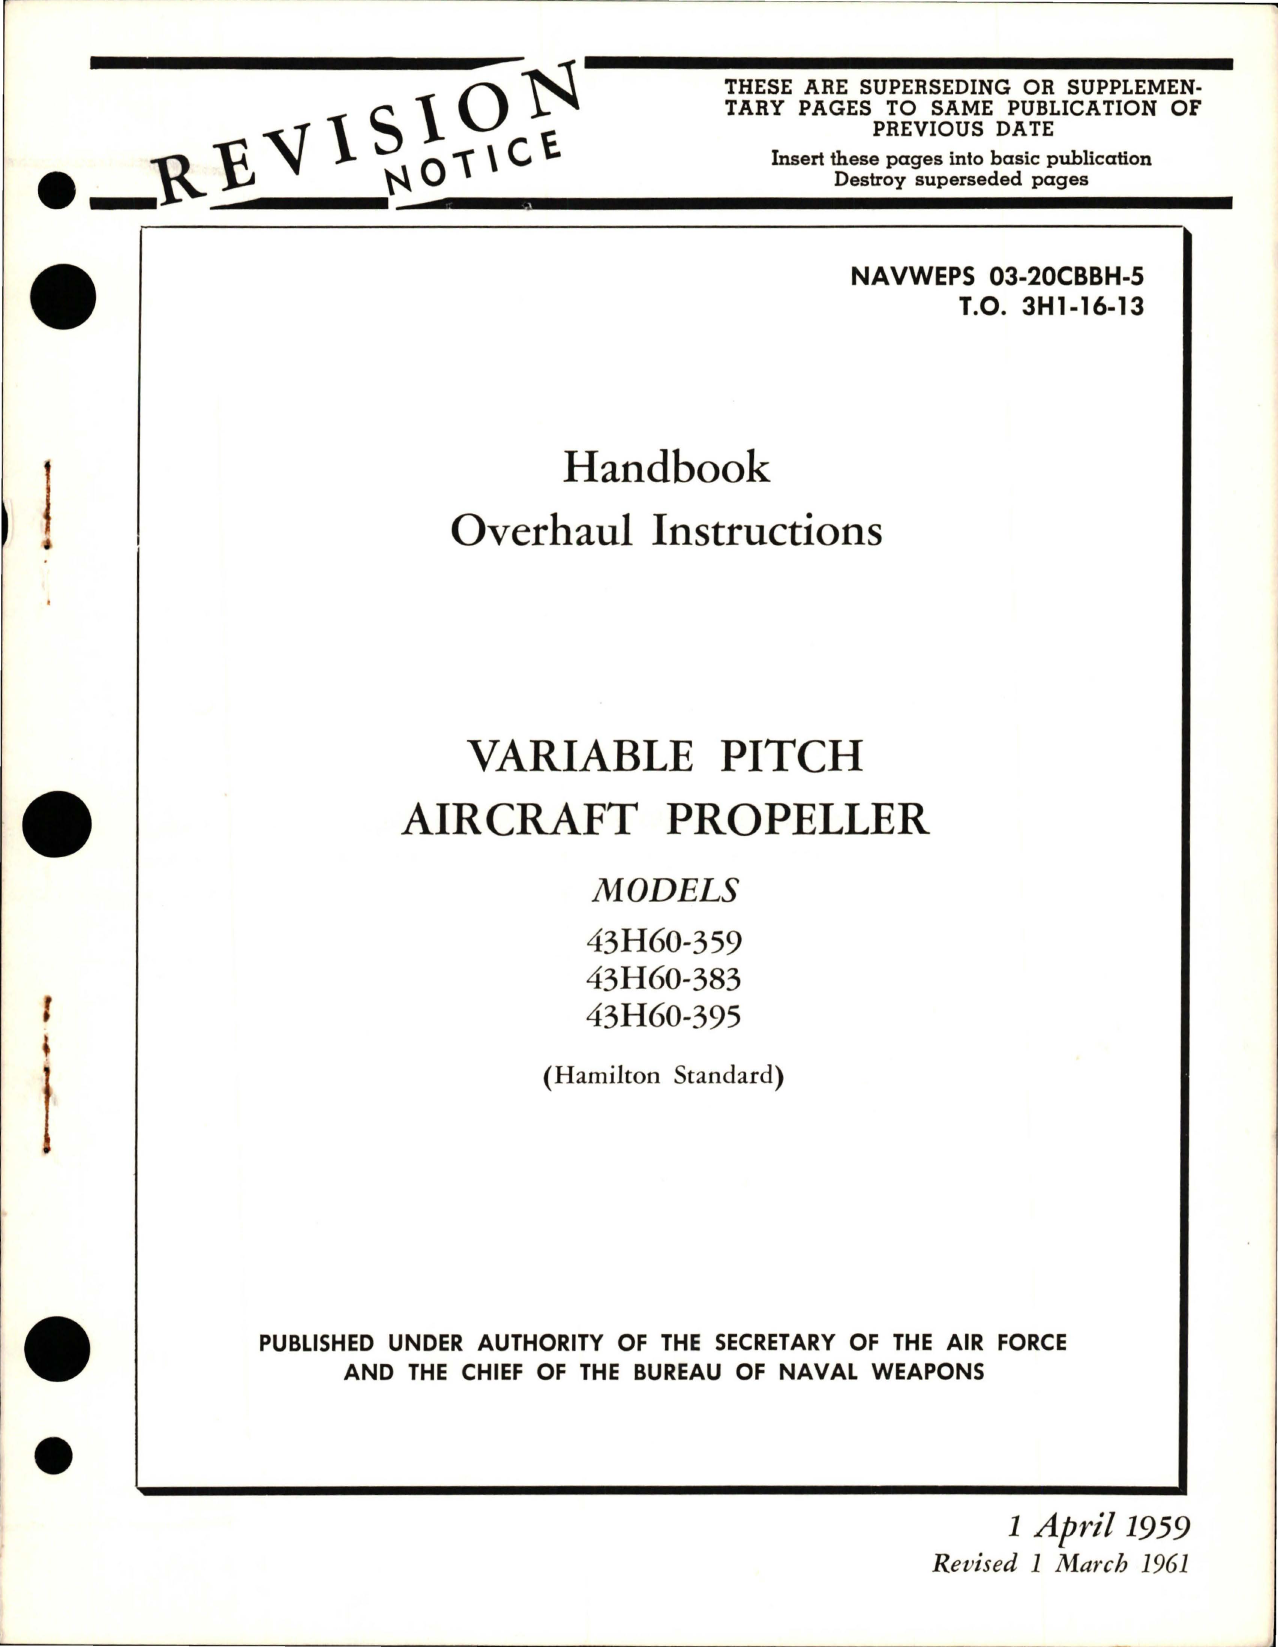 Sample page 1 from AirCorps Library document: Overhaul Instructions for Variable Pitch Propeller - Models 43H60-359, 43H60-383, and 43H60-395